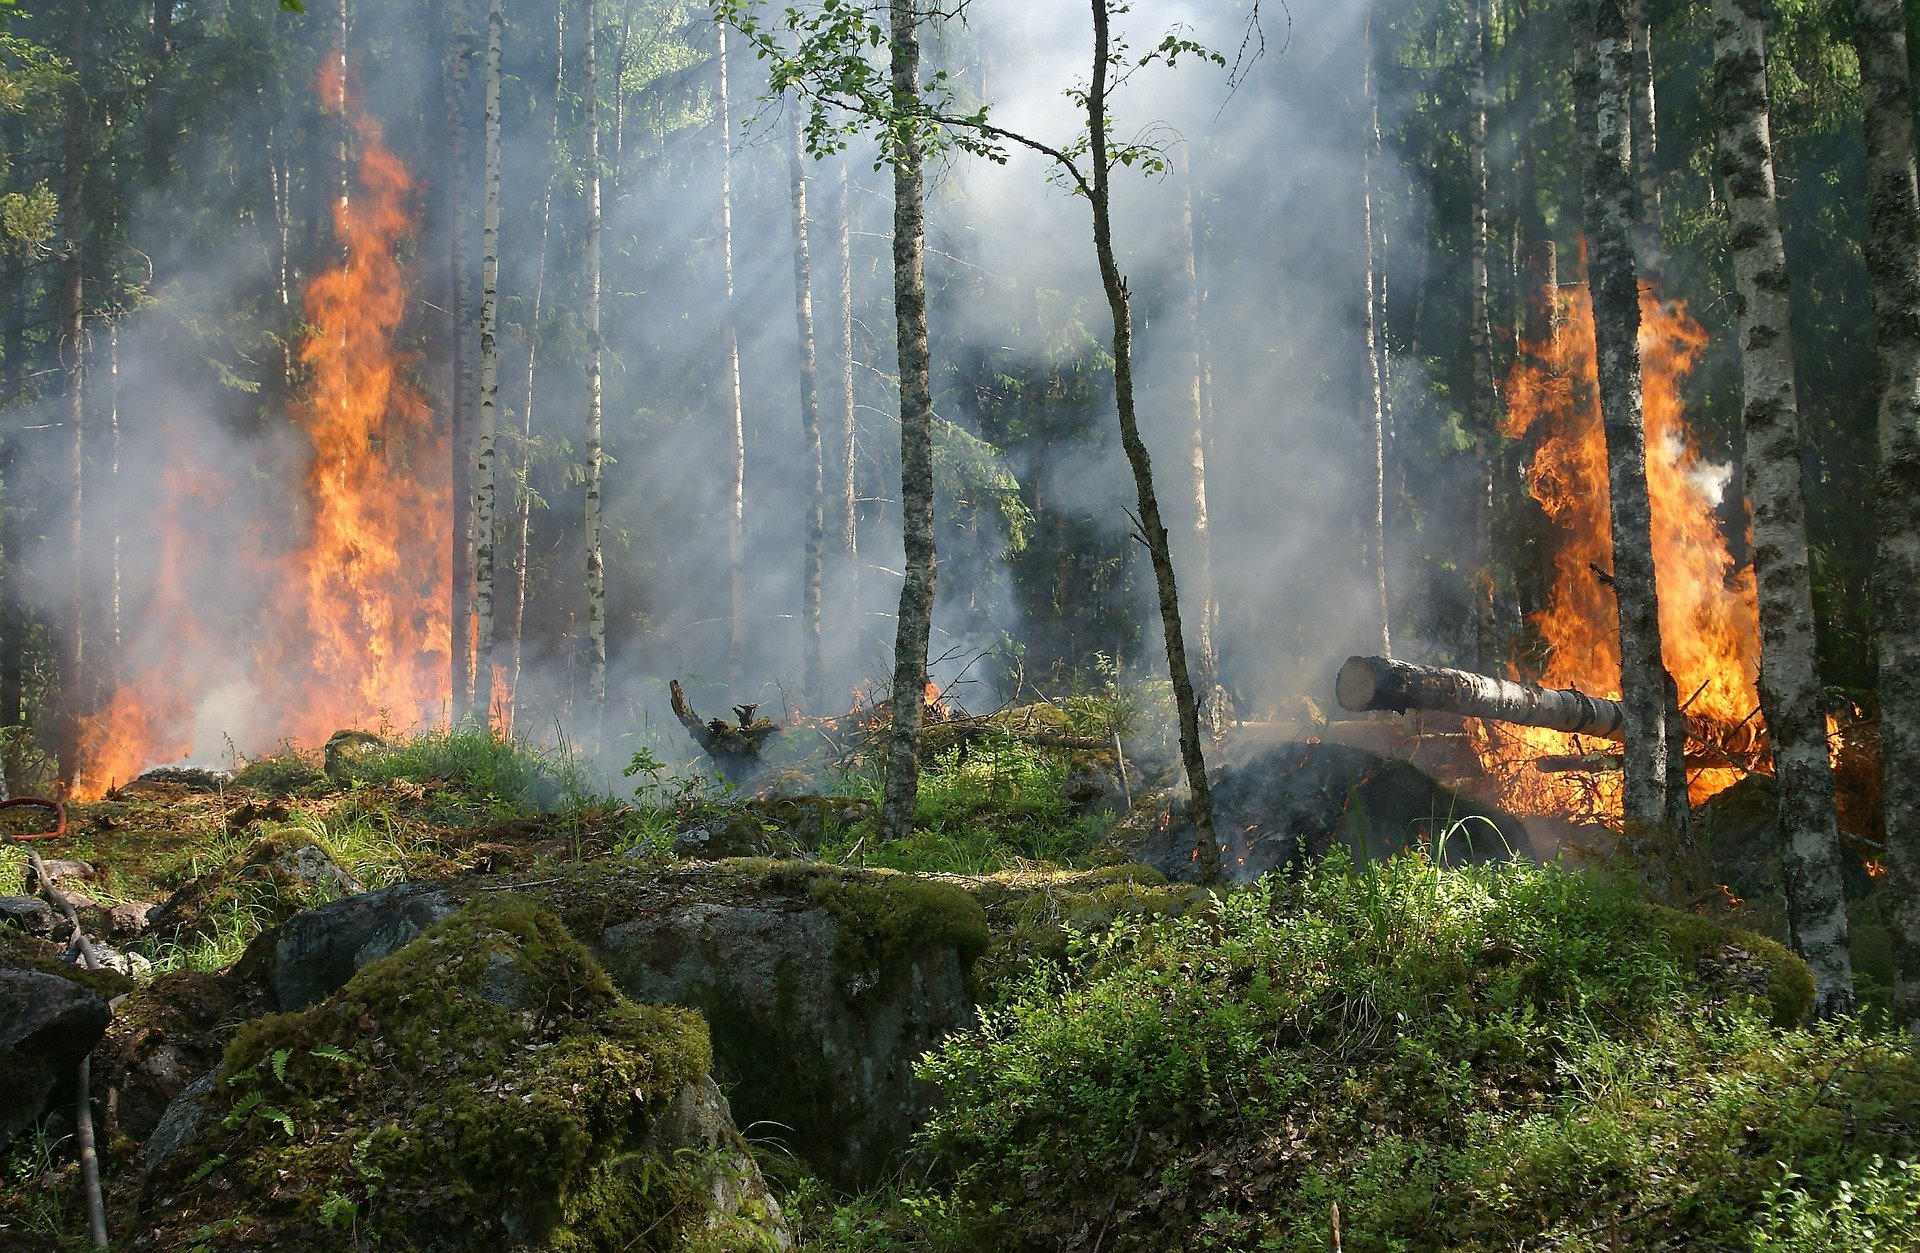 Forest fires have spread to almost all continents